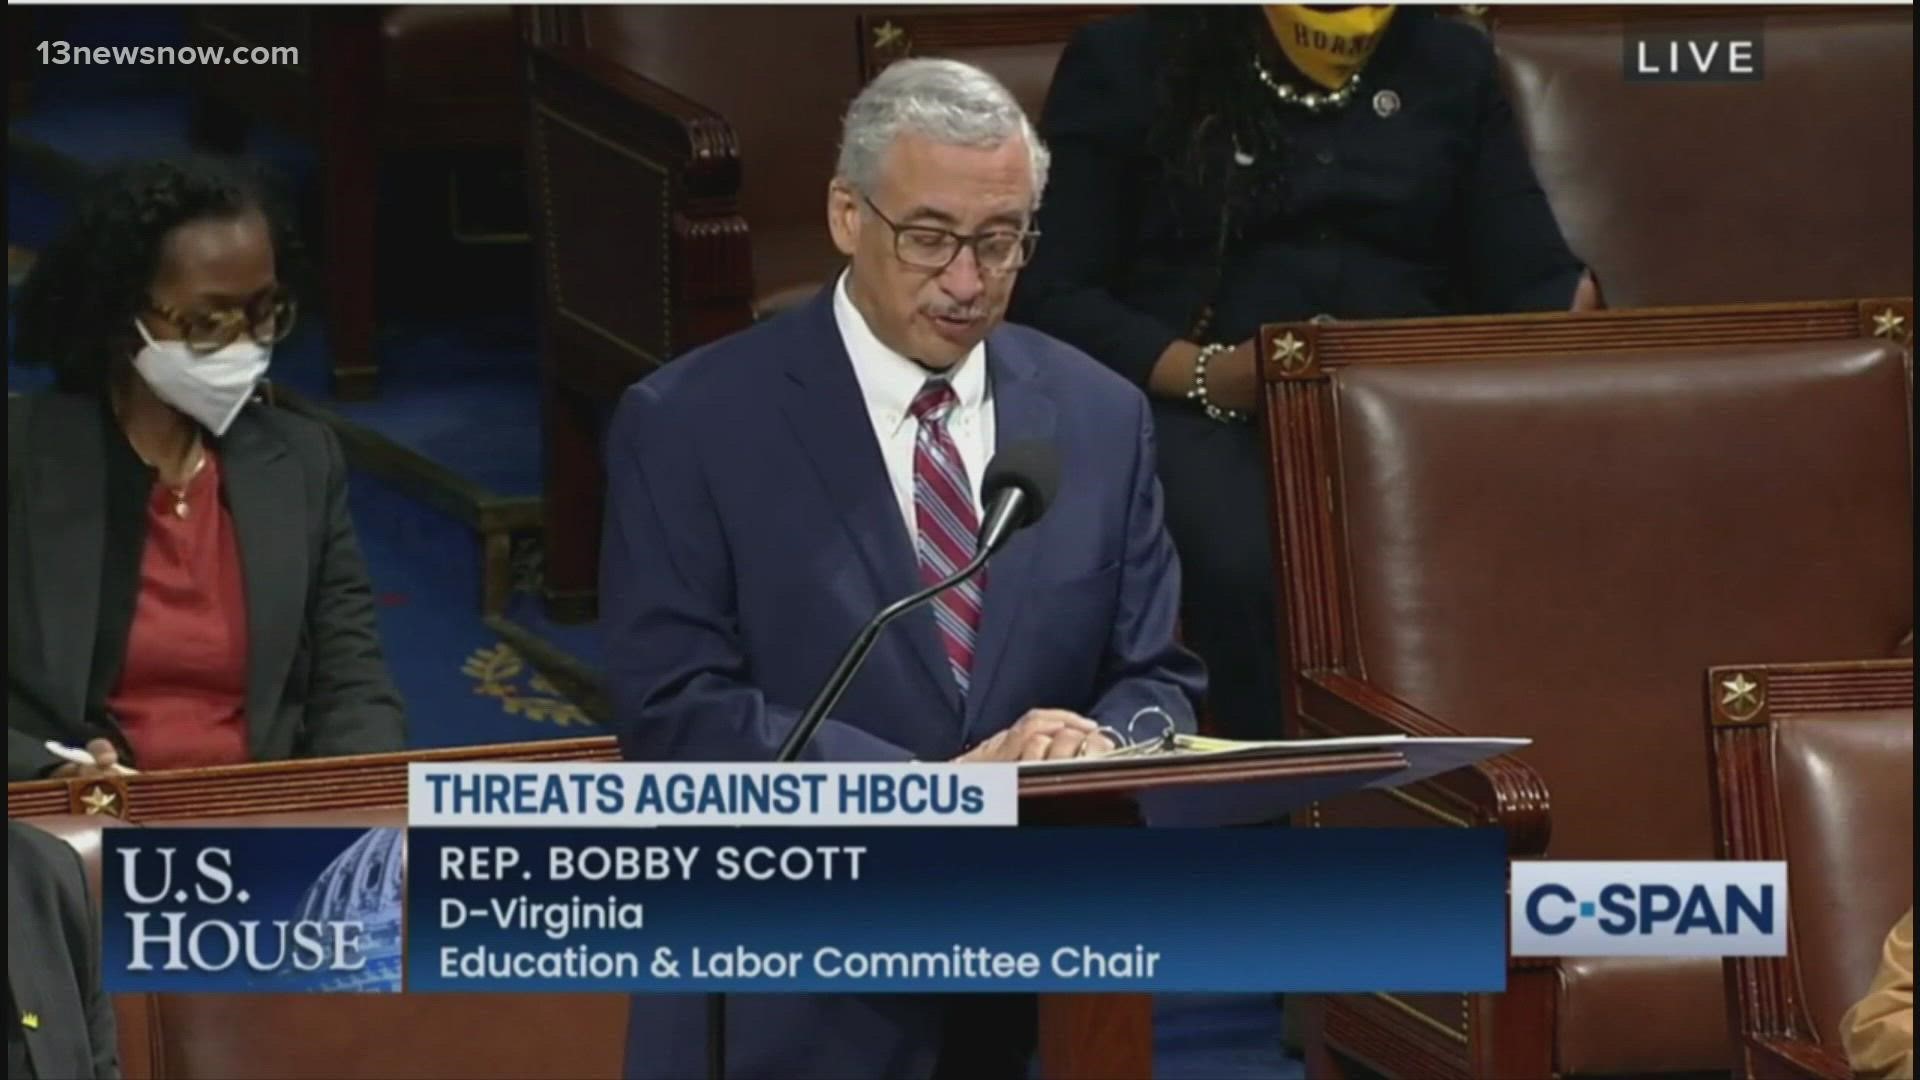 The U.S. House of Representatives unanimously passed a resolution condemning recent bomb threats made against historically Black colleges and universities (HBCUs).